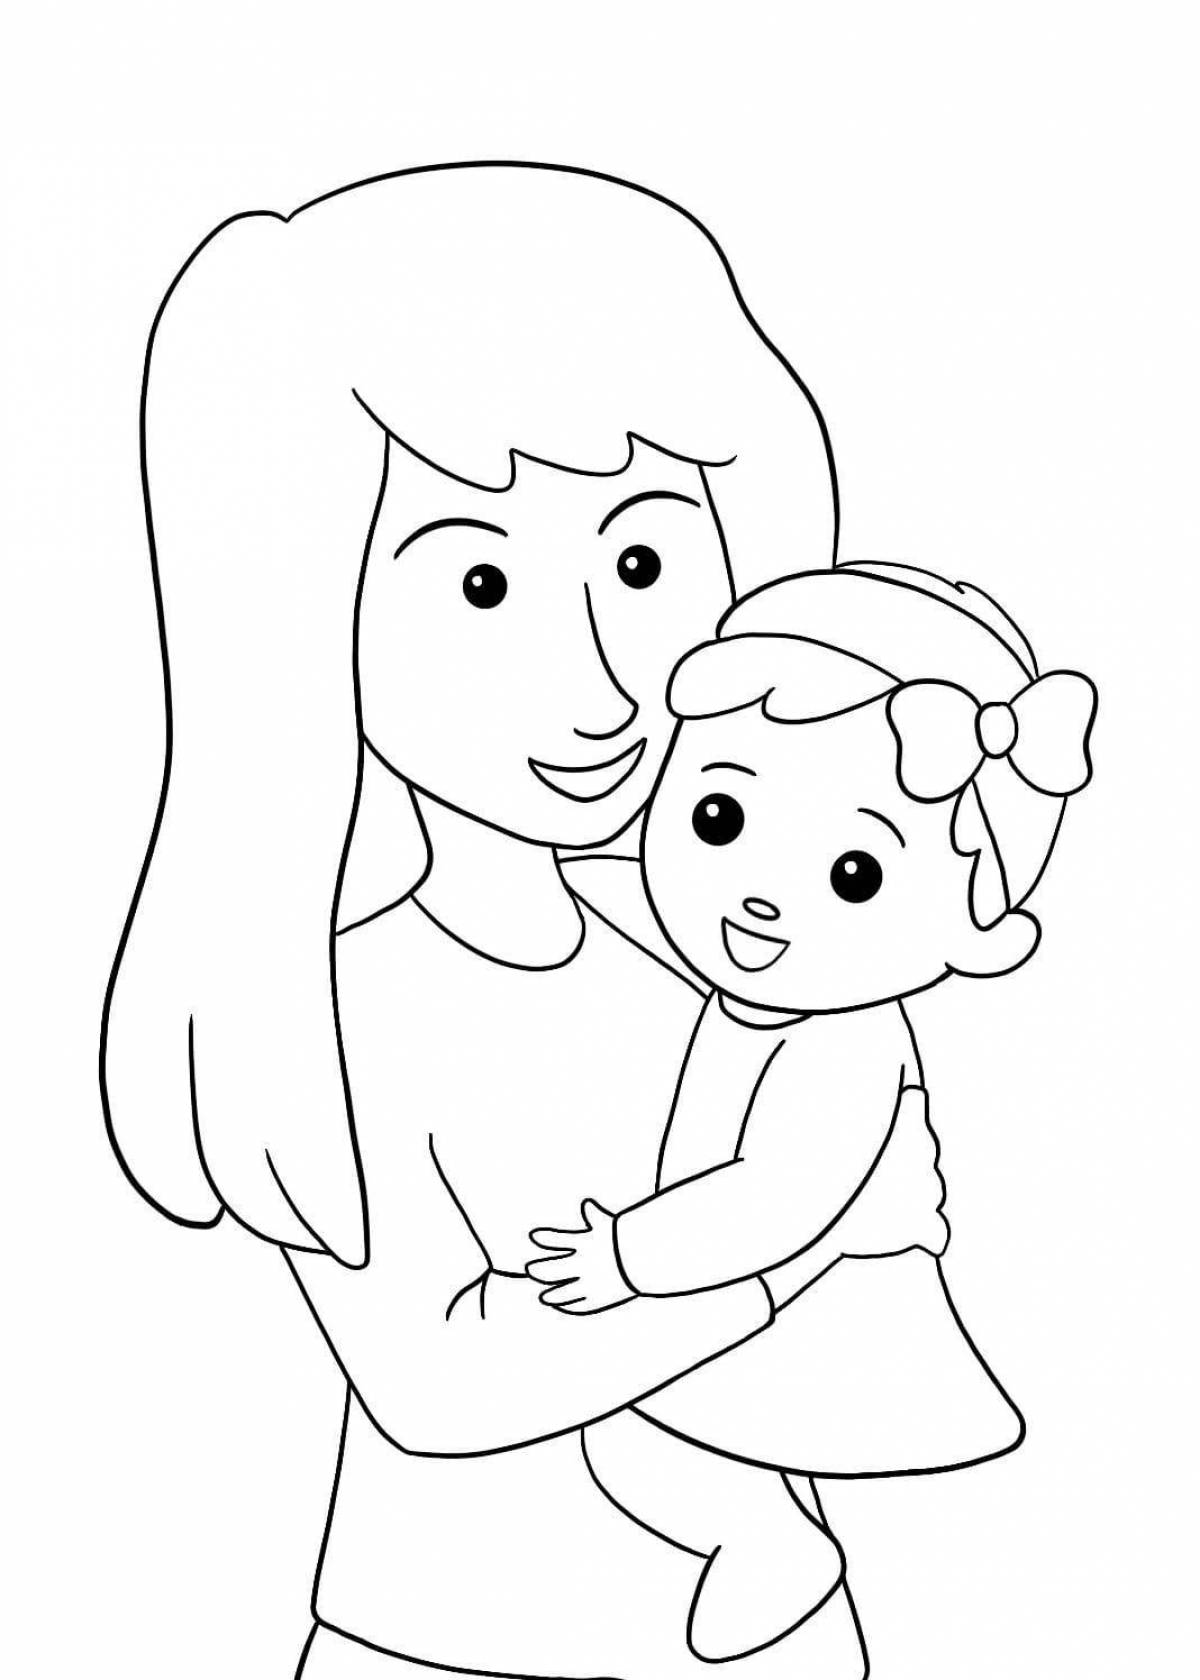 Coloring page adorable mother and daughter